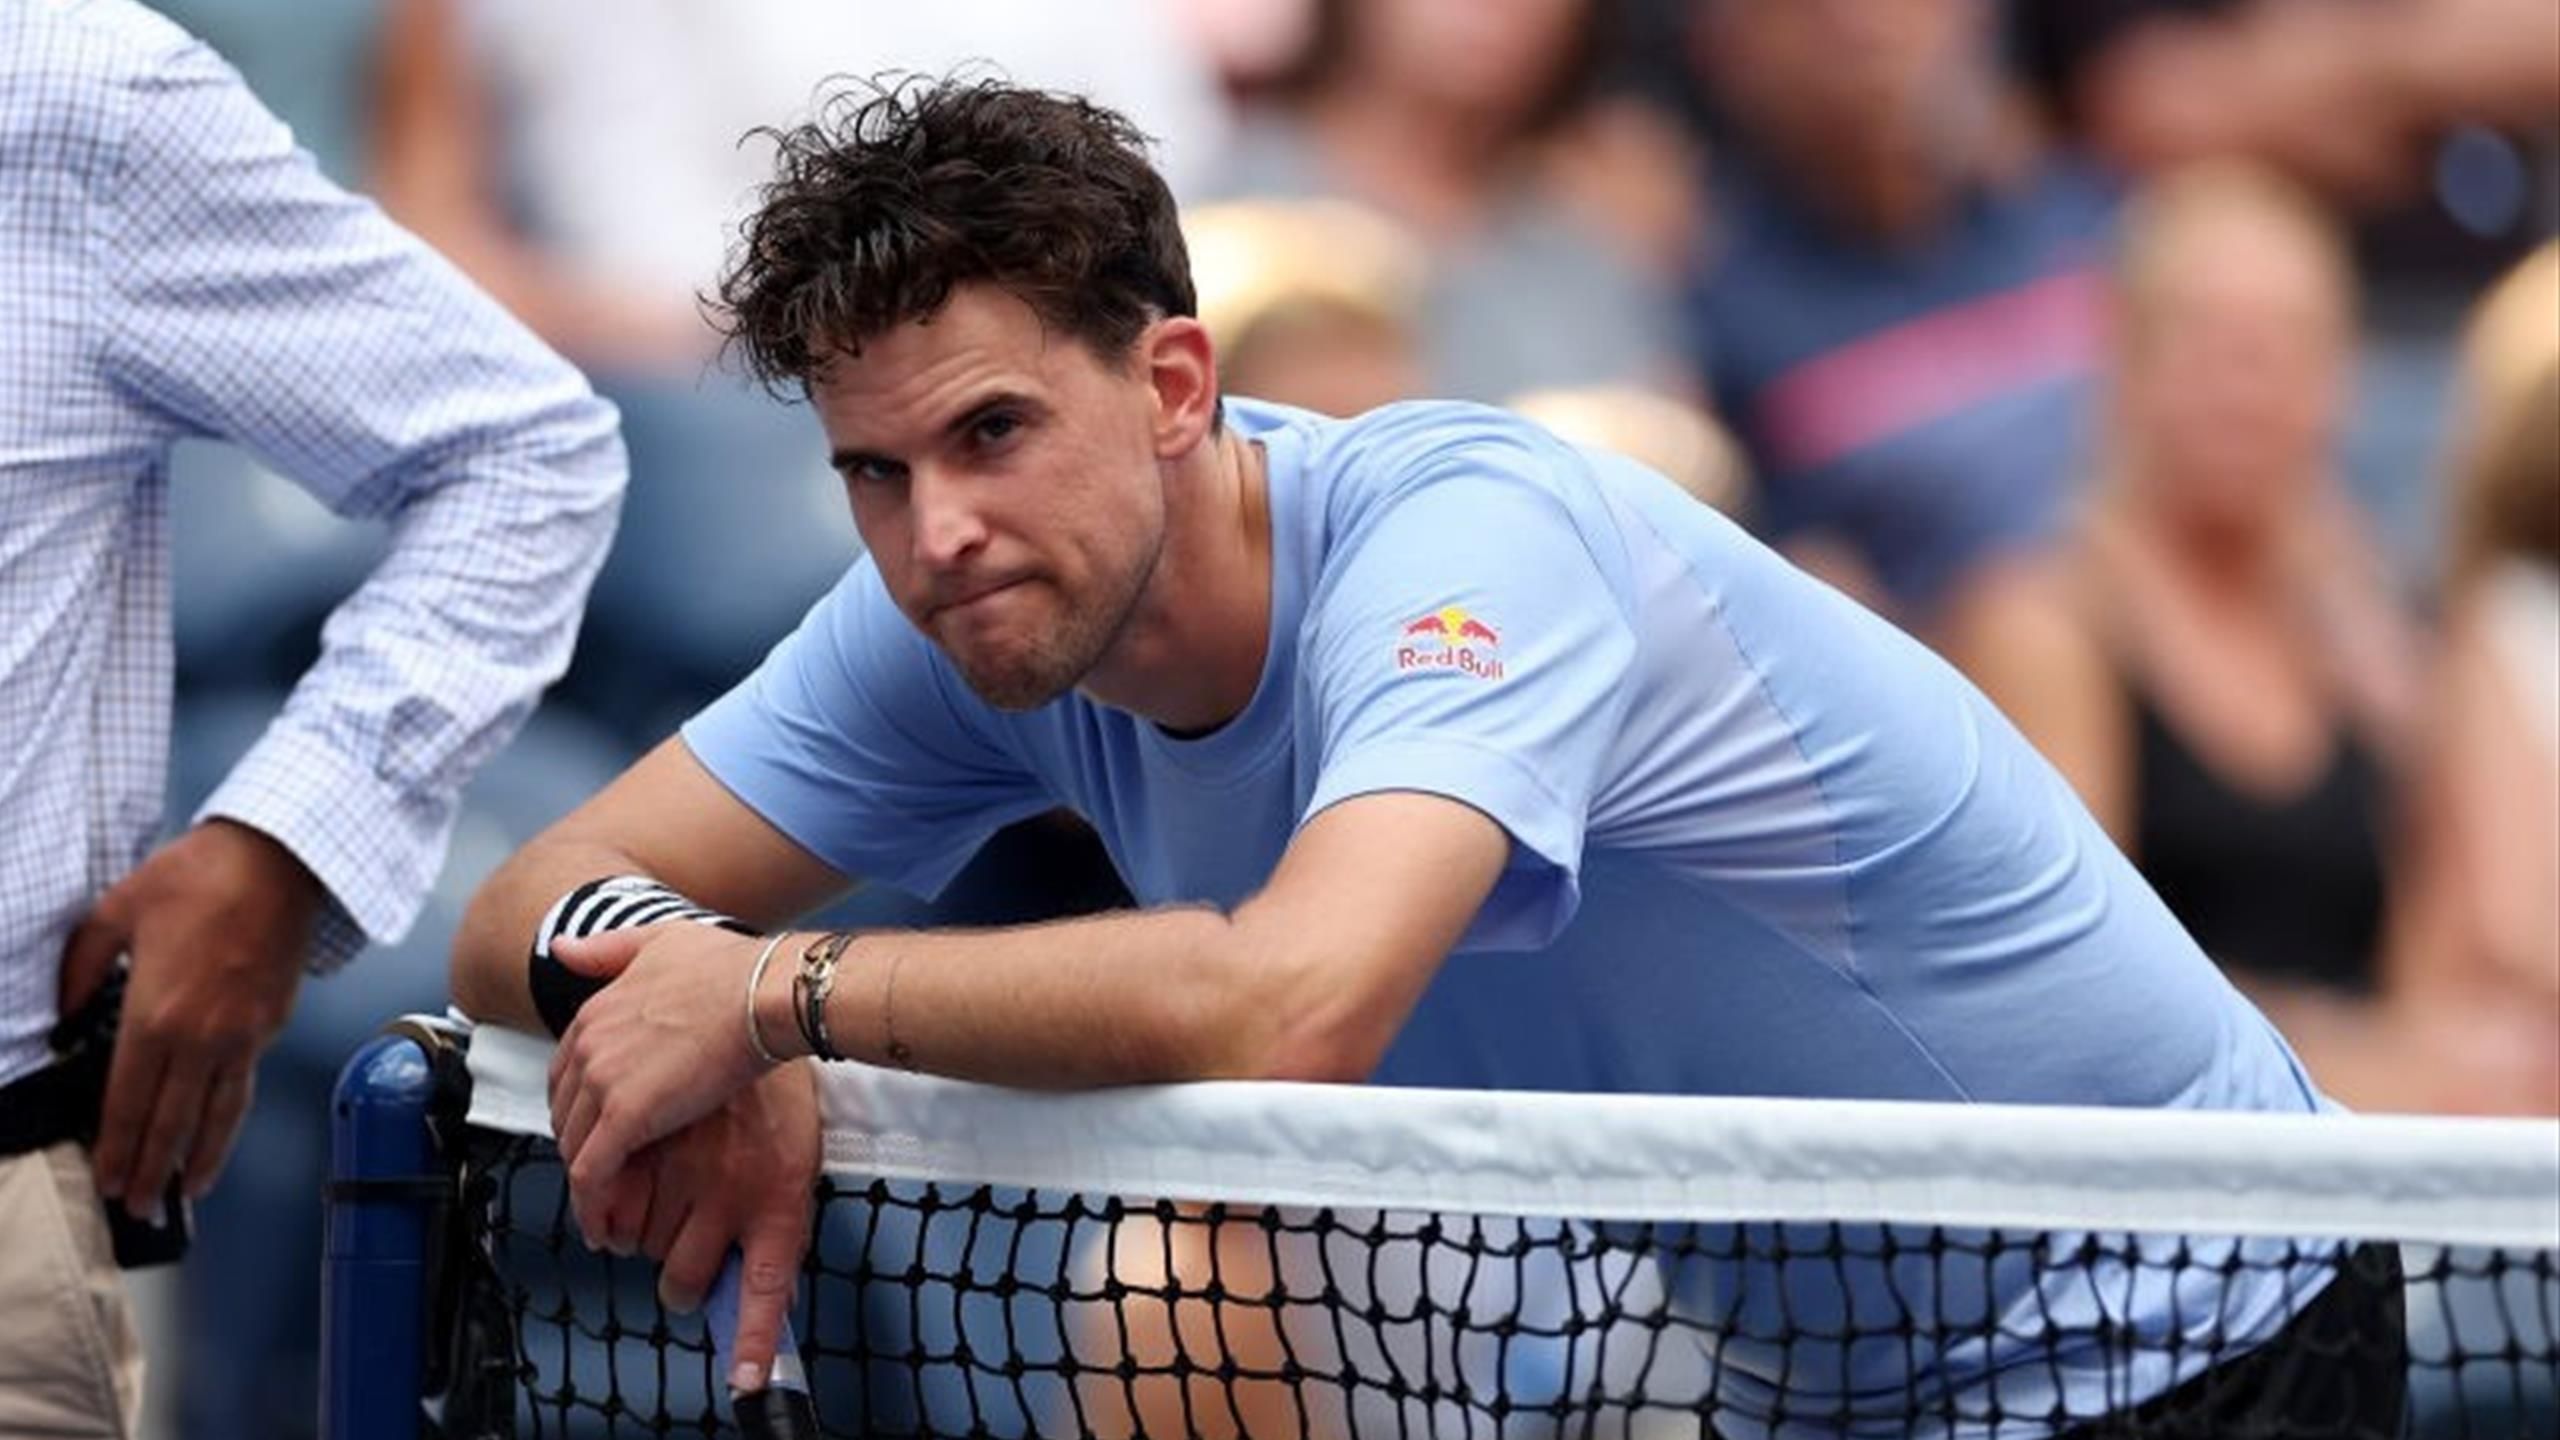 Dominic Thiem criticizes himself after defeat to Rafael Nadal: “This has been a problem for a long time”